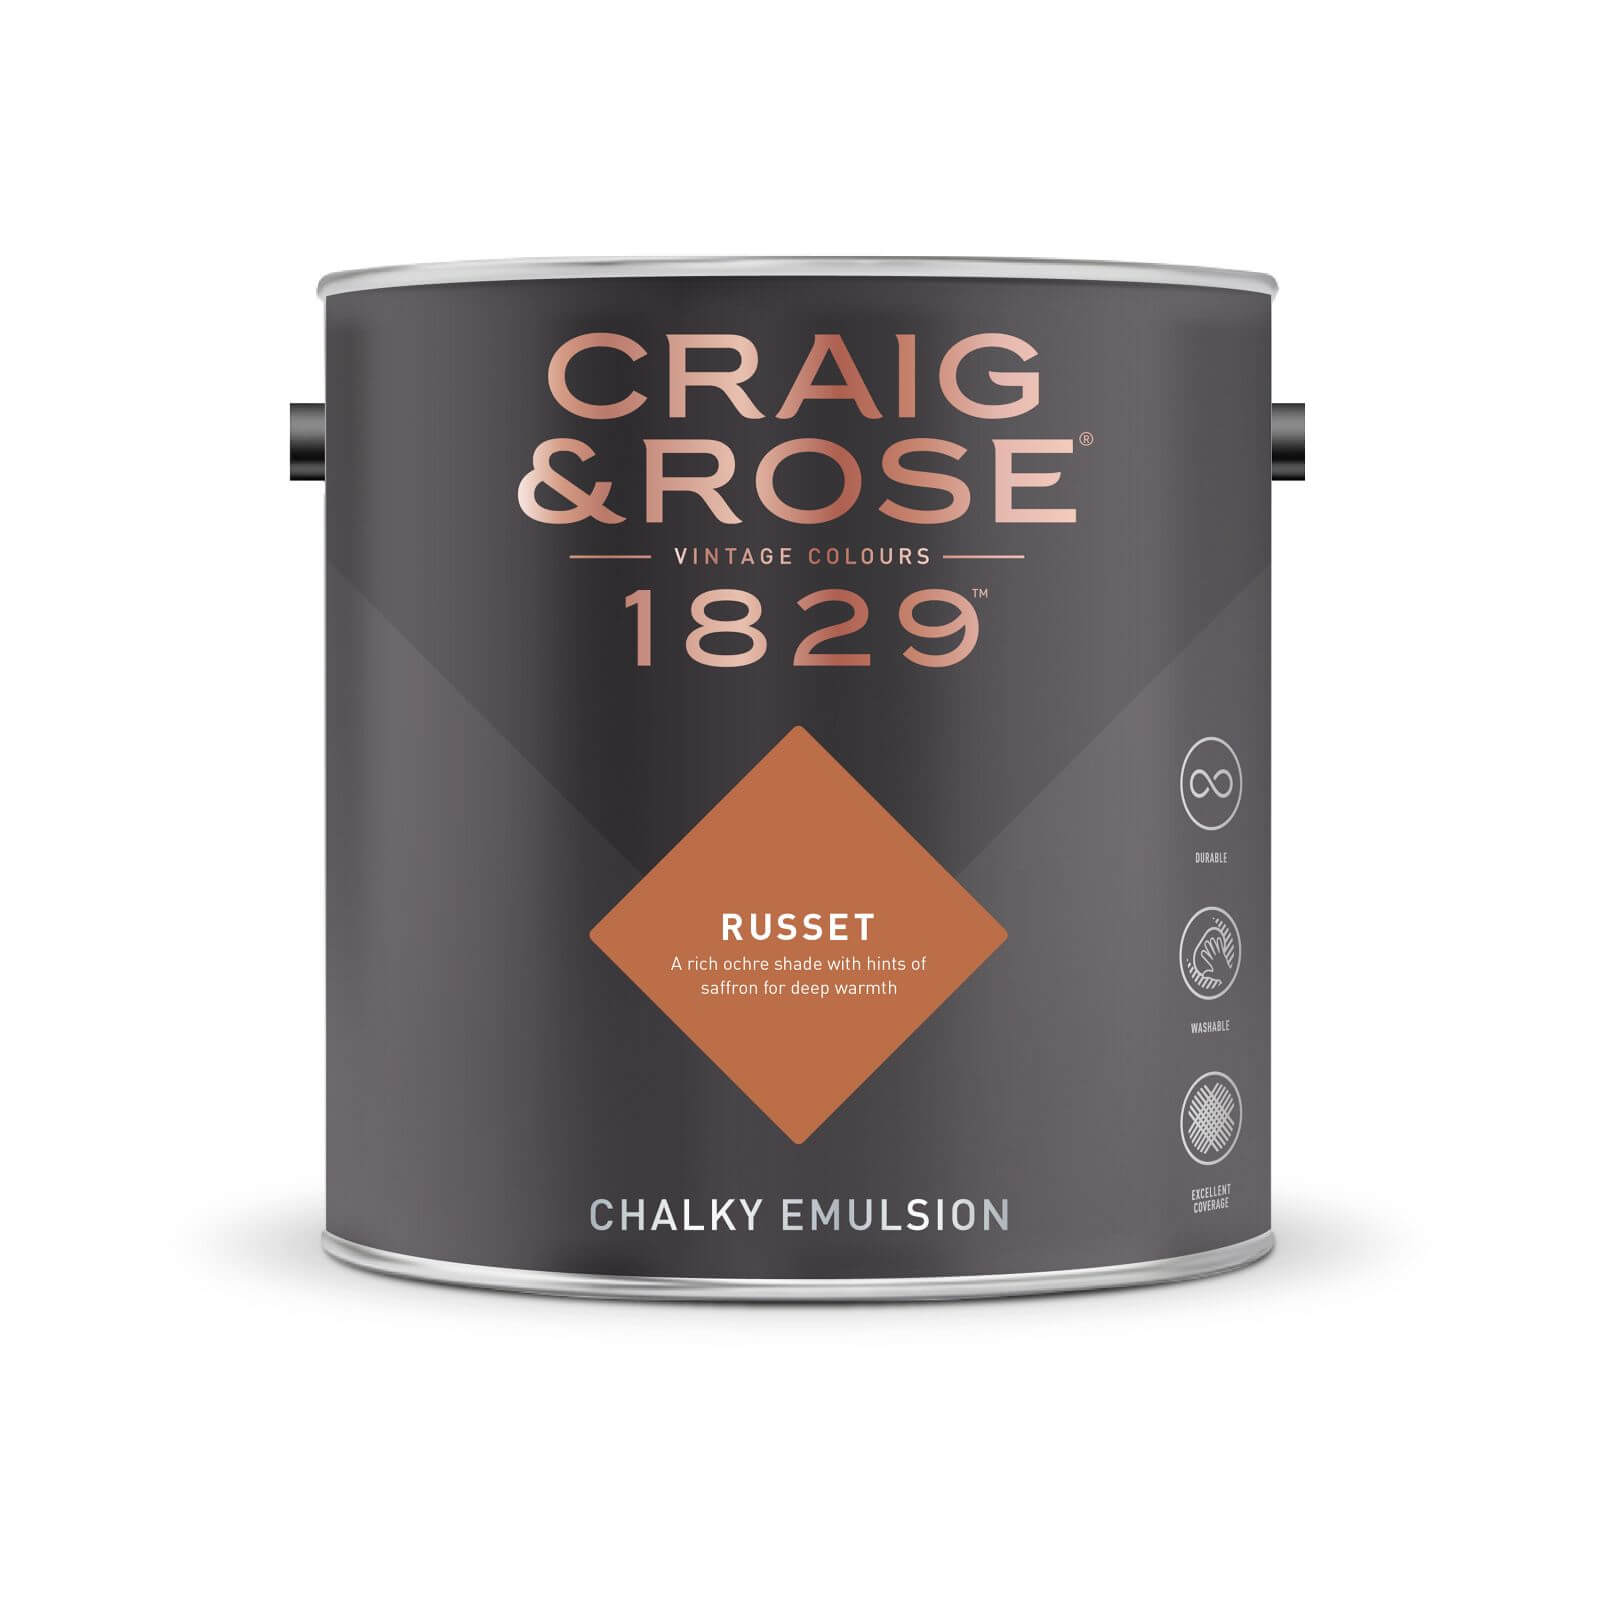 Craig & Rose 1829 Chalky Emulsion Paint Russet - Tester 50ml